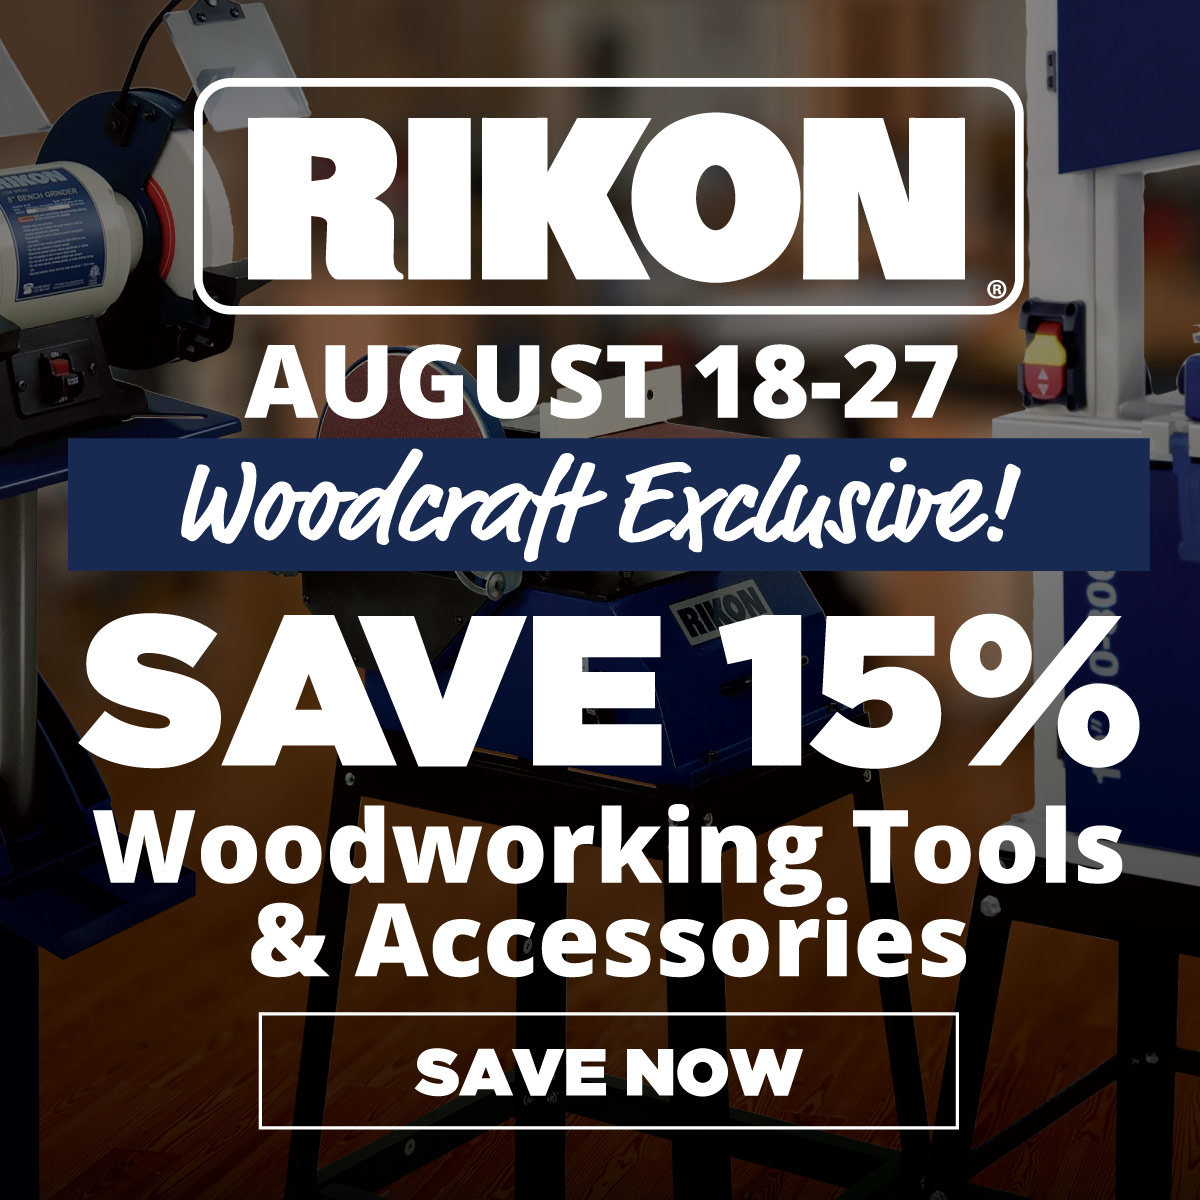 Save 15% Rikon Woodworking Tools & Accessories - Woodcraft Exclusive!